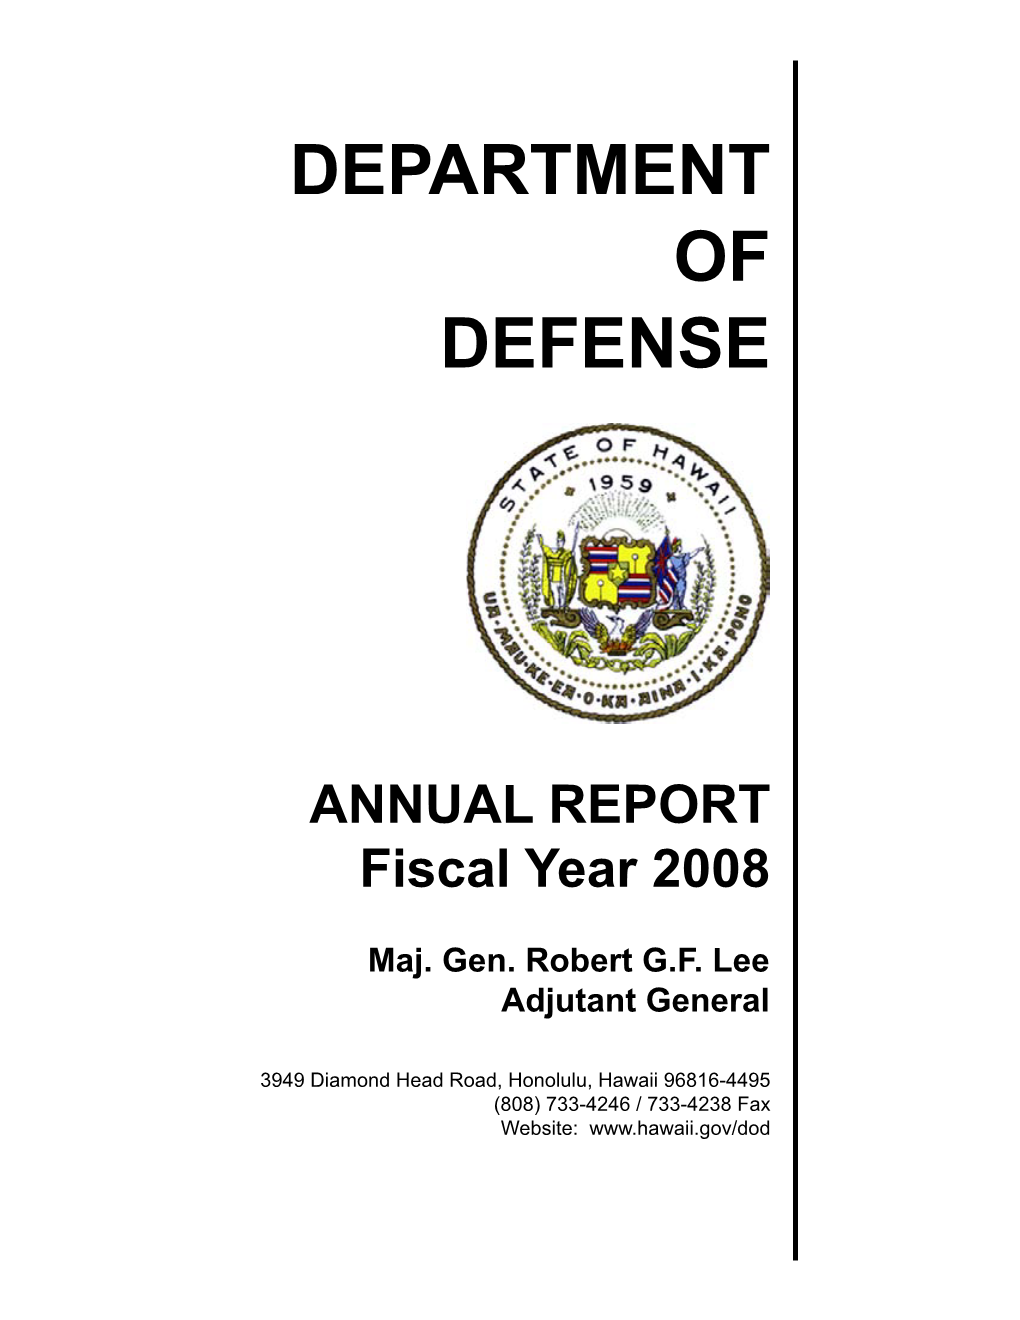 ANNUAL REPORT Fiscal Year 2008